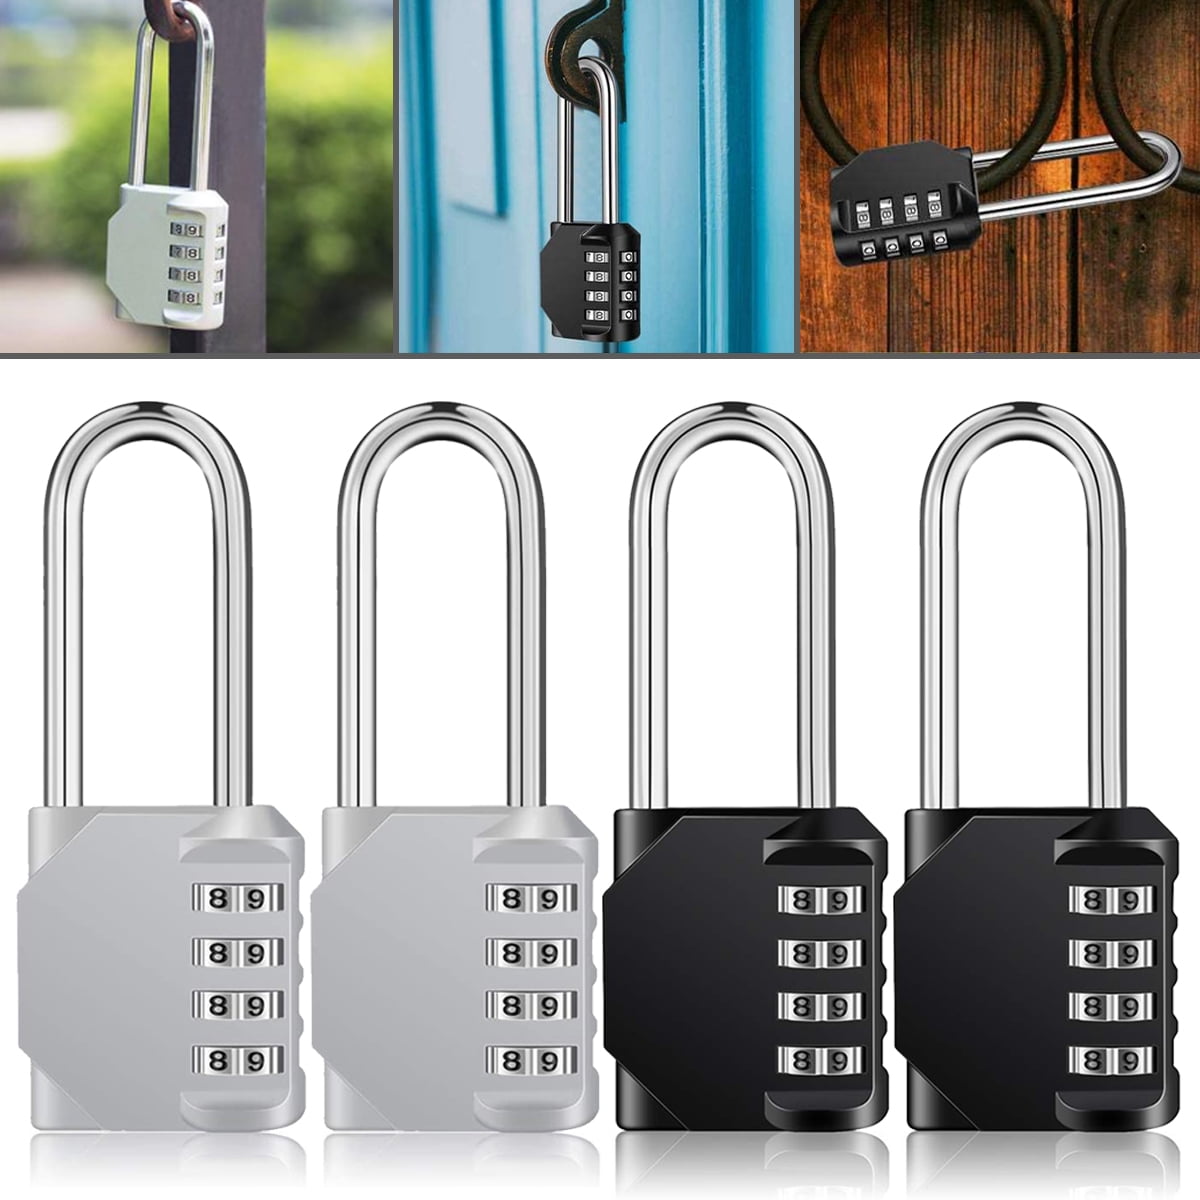 2.75 Wide 5 Position resettable U-Lock Padlock with 4.57 Long Shackle,  Gym, Suitable for lockers. File cabinets, wardrobes, Fences, Sheds, Door